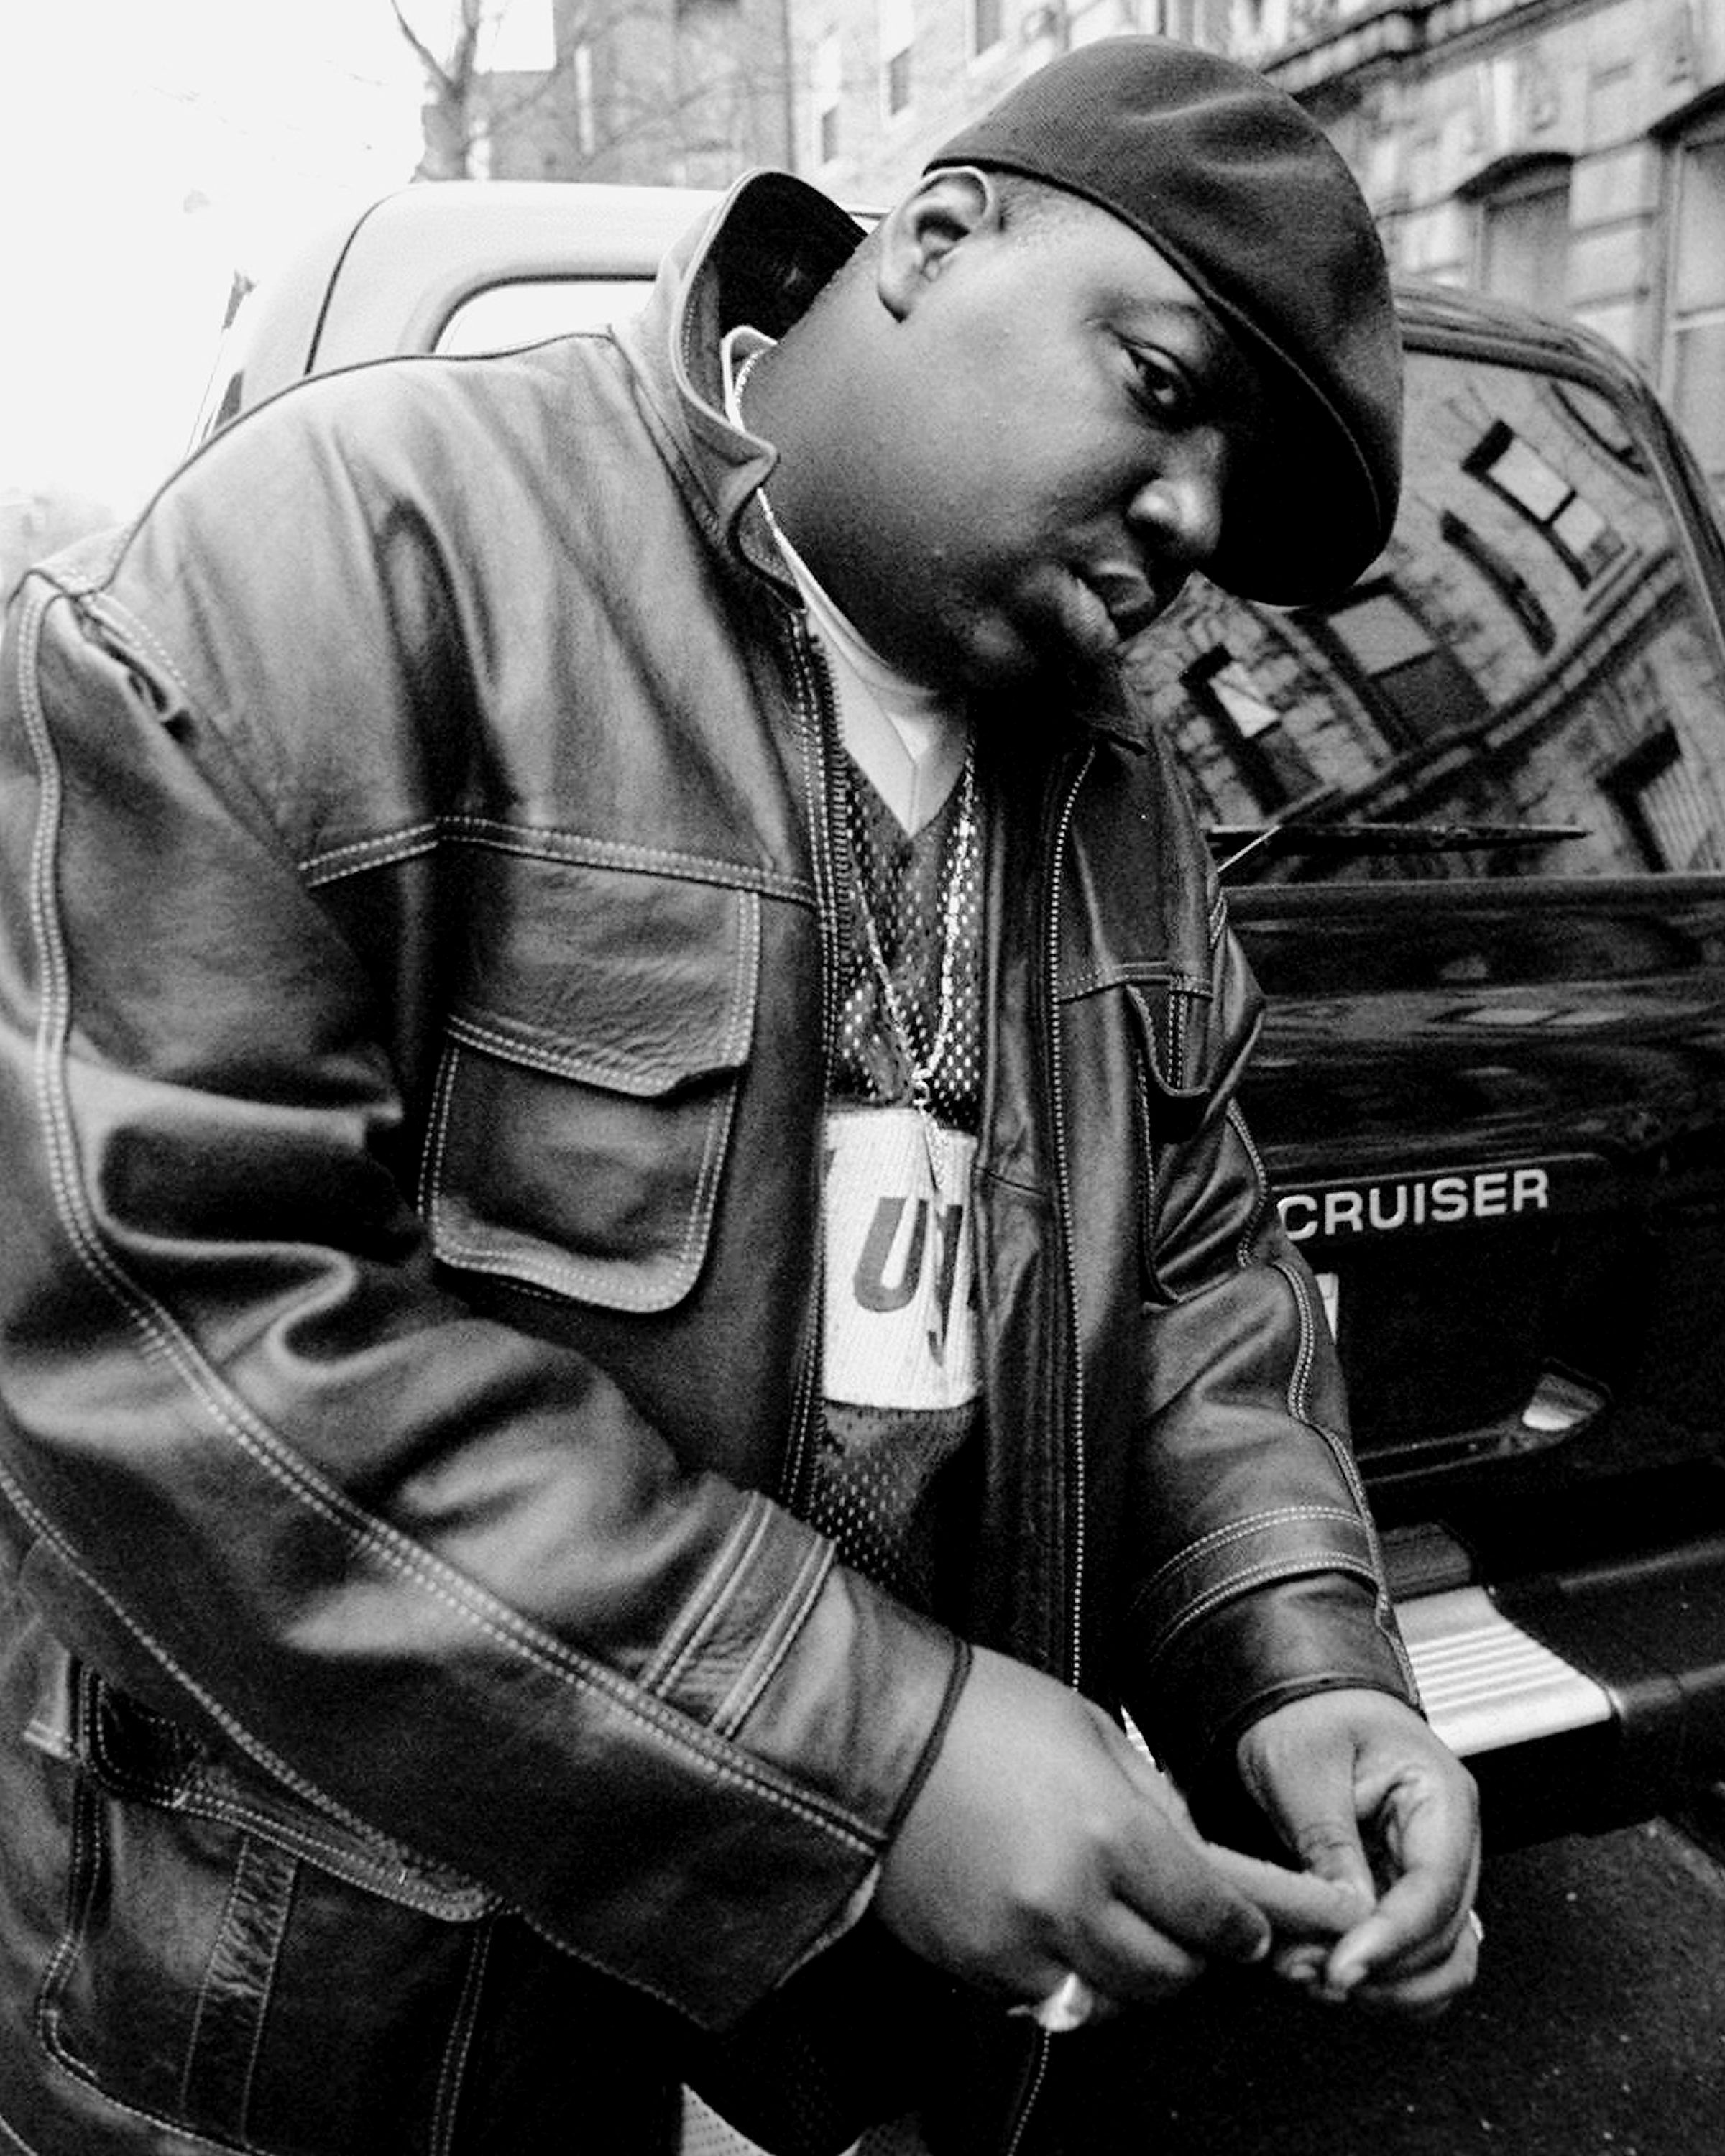 Fans Remember The Notorious B.I.G. On The 20th Anniversary Of His Death